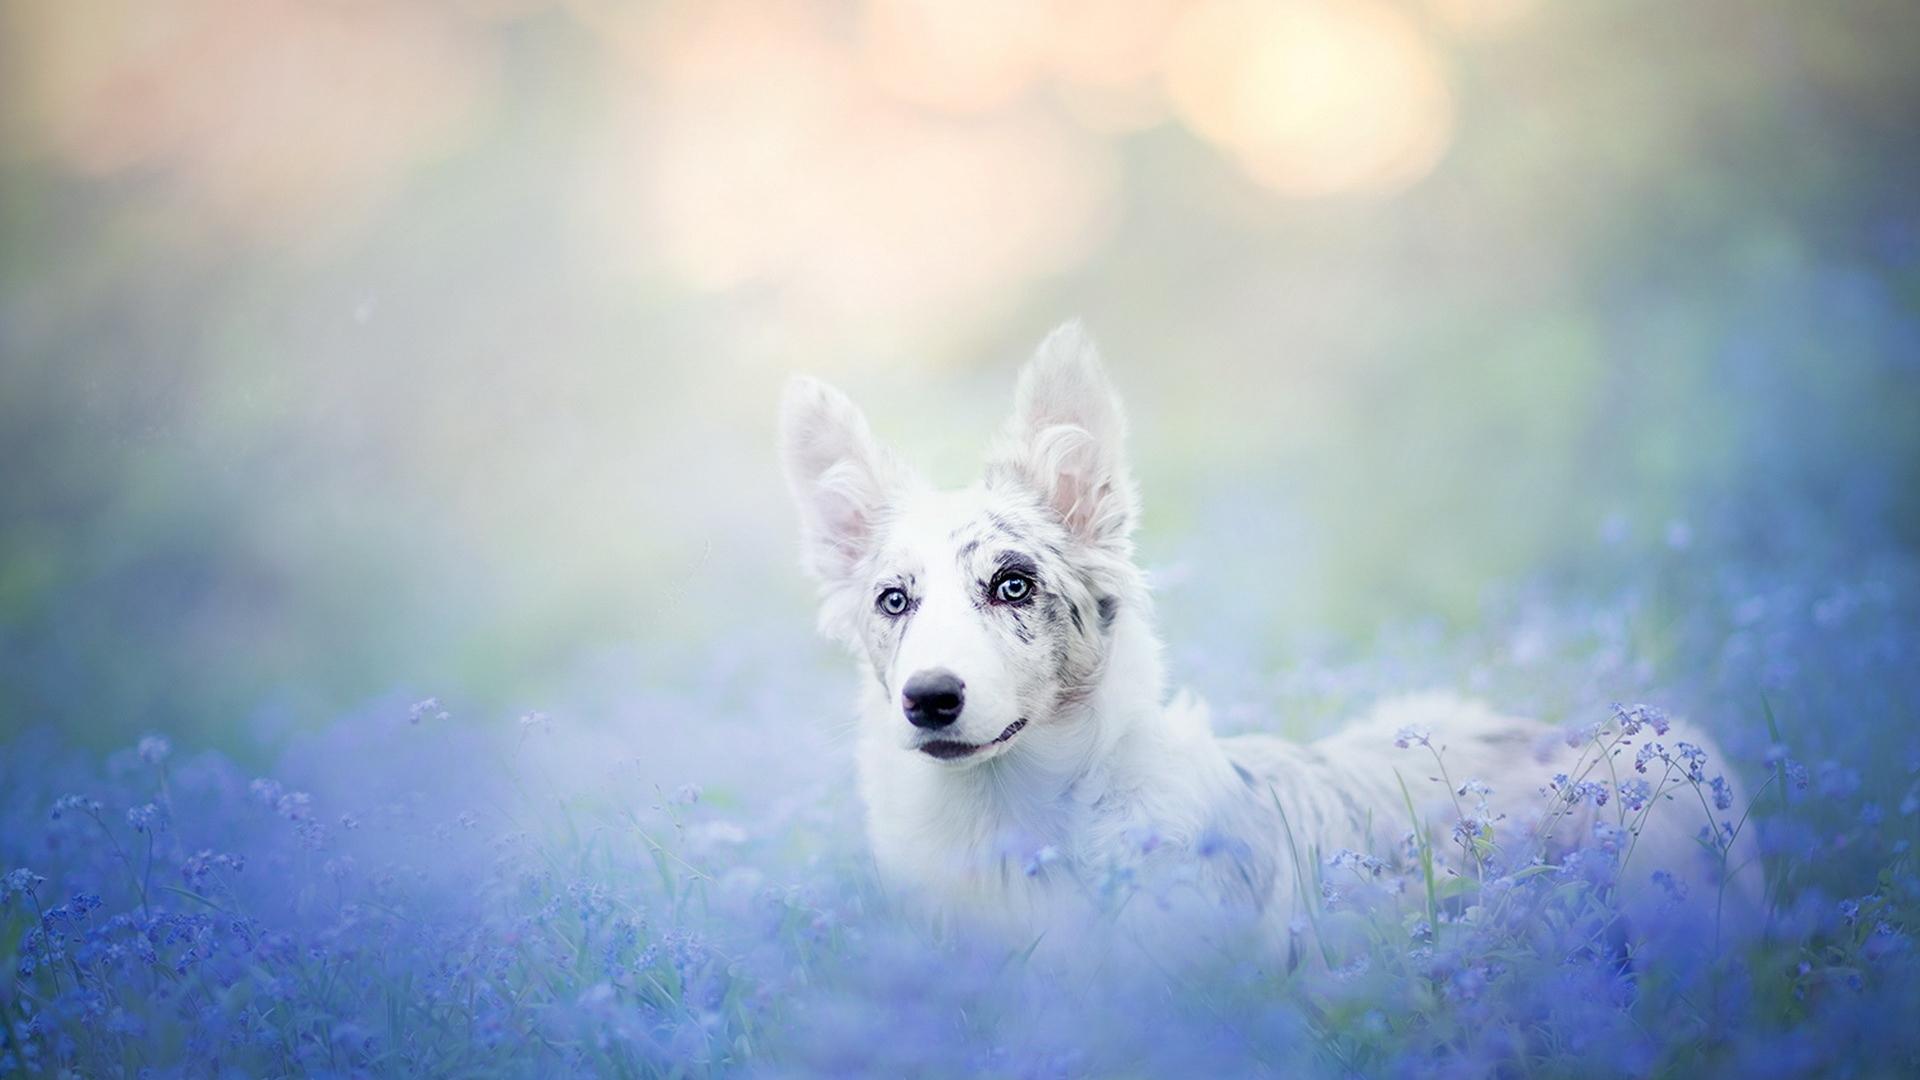 Cute Puppy Summer Wallpapers For Free